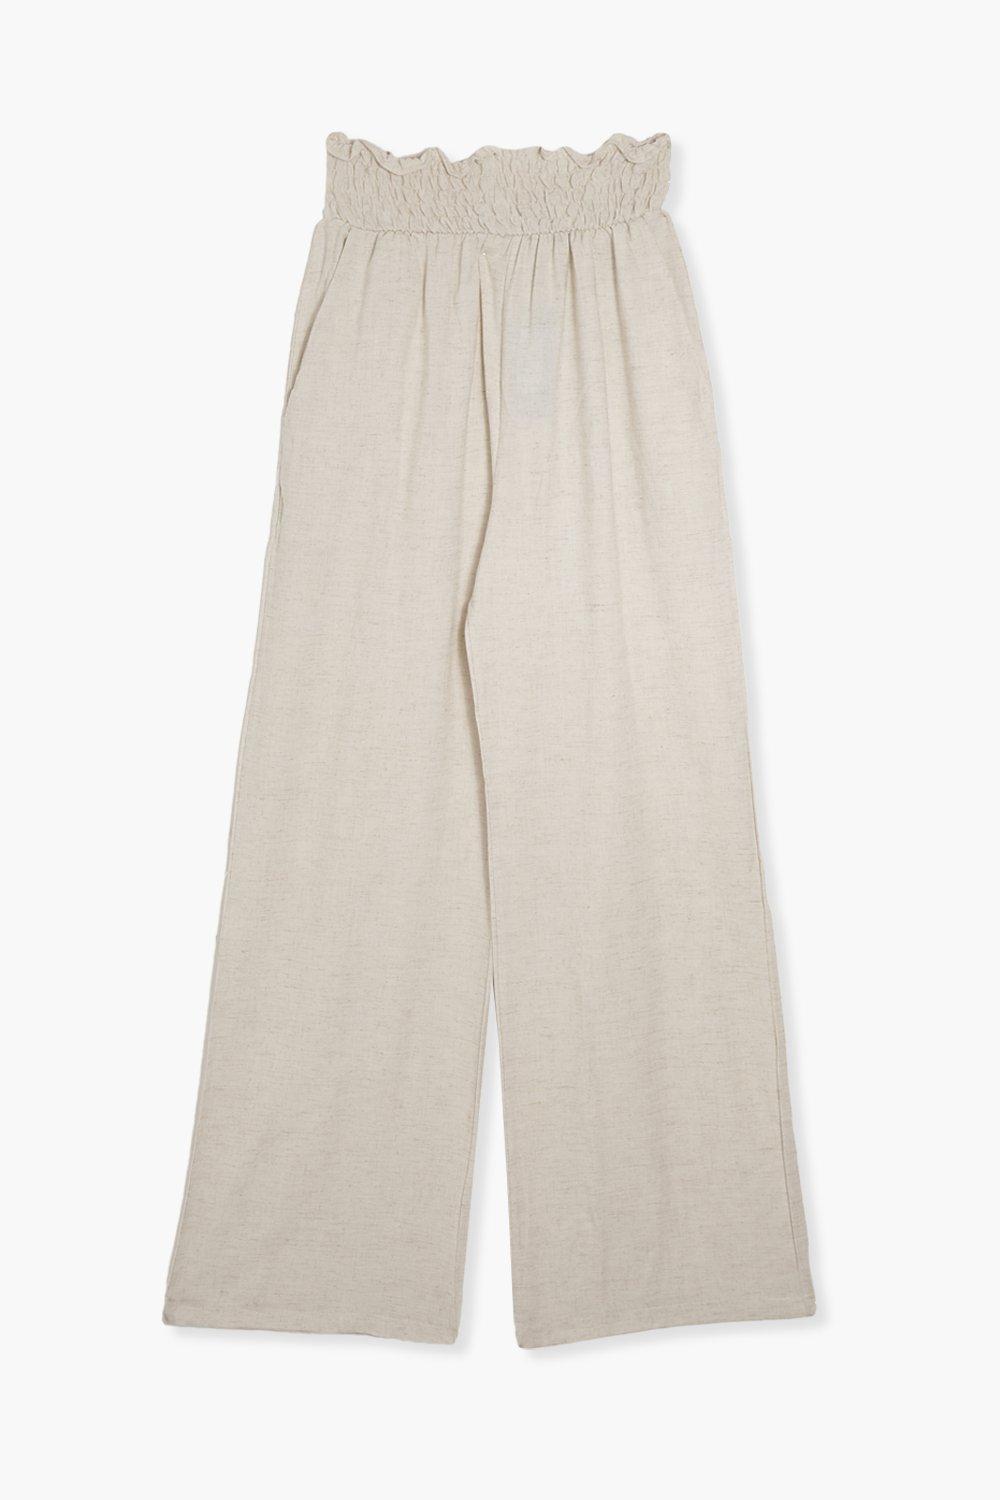 Linen Look Relaxed Fit Wide Leg Pants